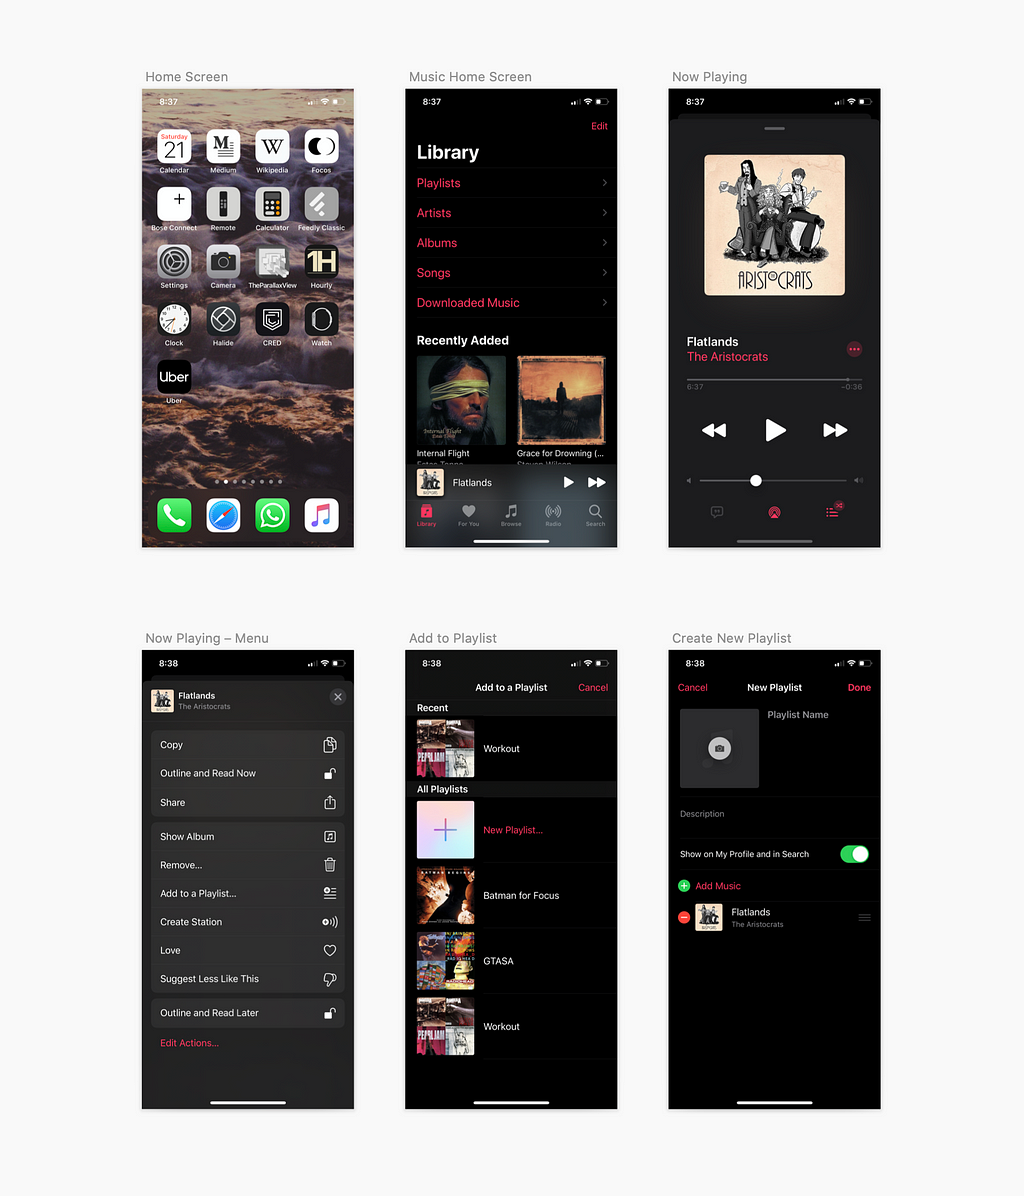 6 artboards in a screen flow in a music app that accomplishes the task of adding the “Now Playing” song to a new playlist